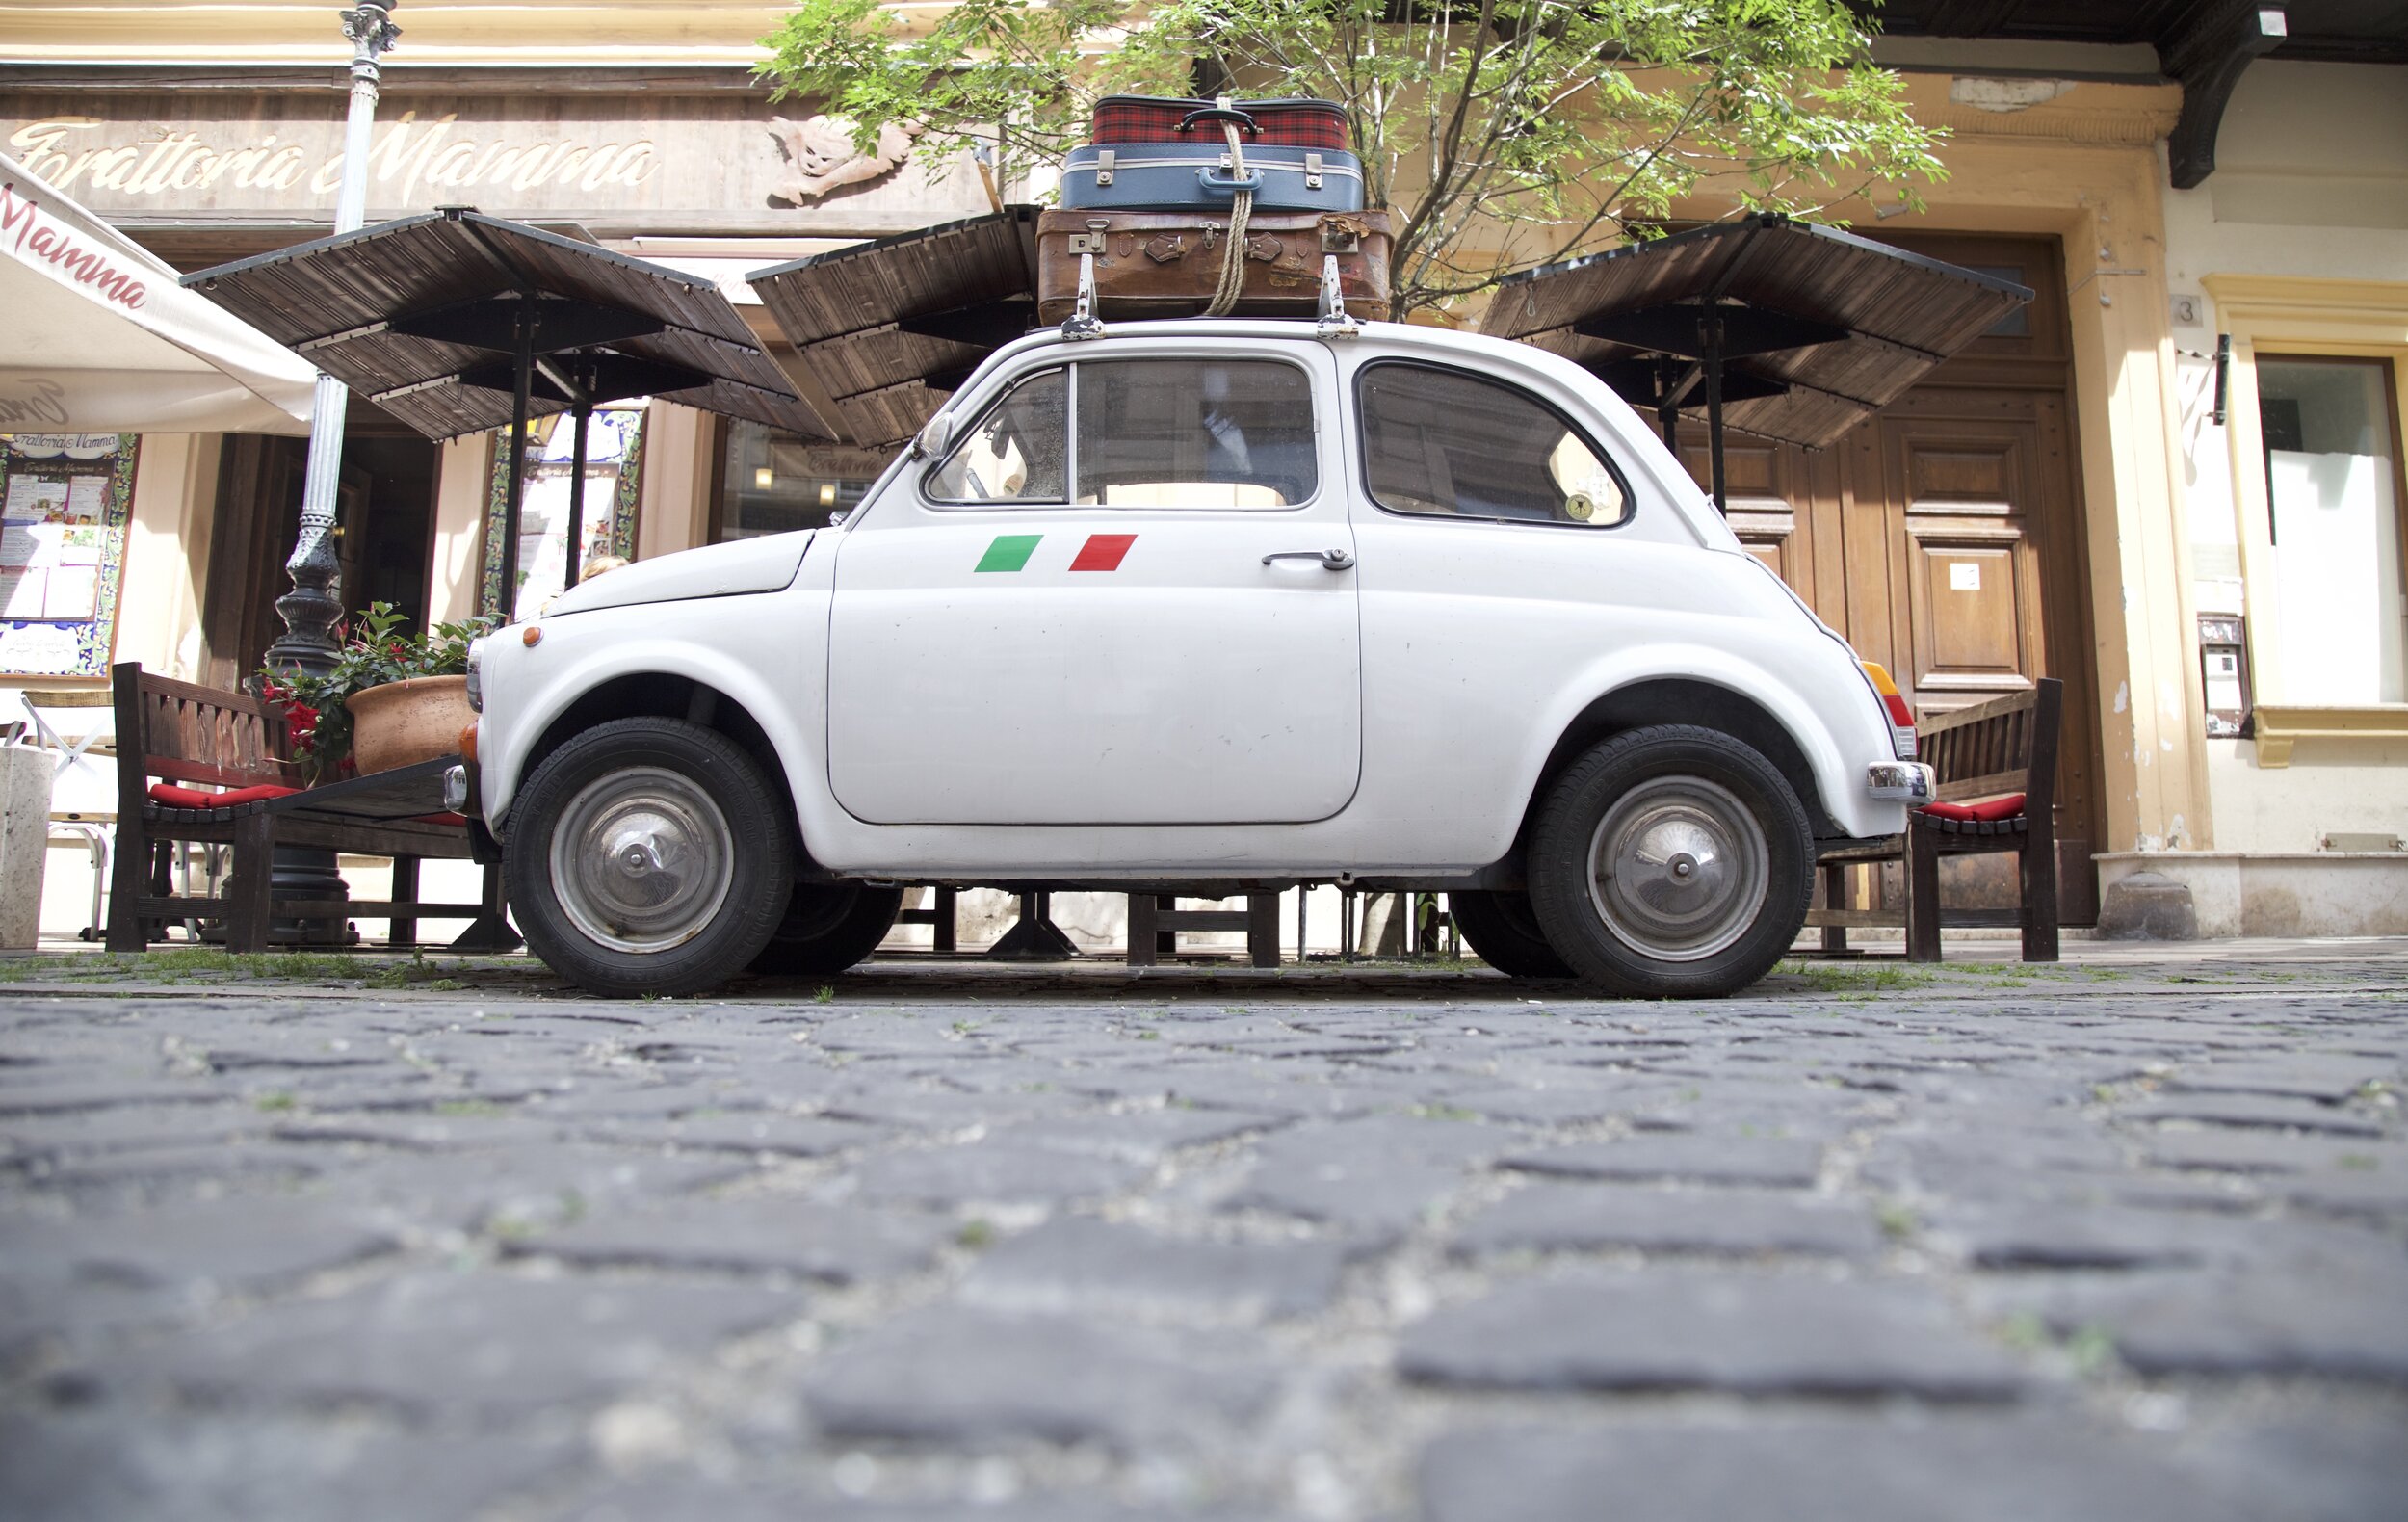  Take a guided tour of the city in a vintage Fiat, the most famous Italian car 